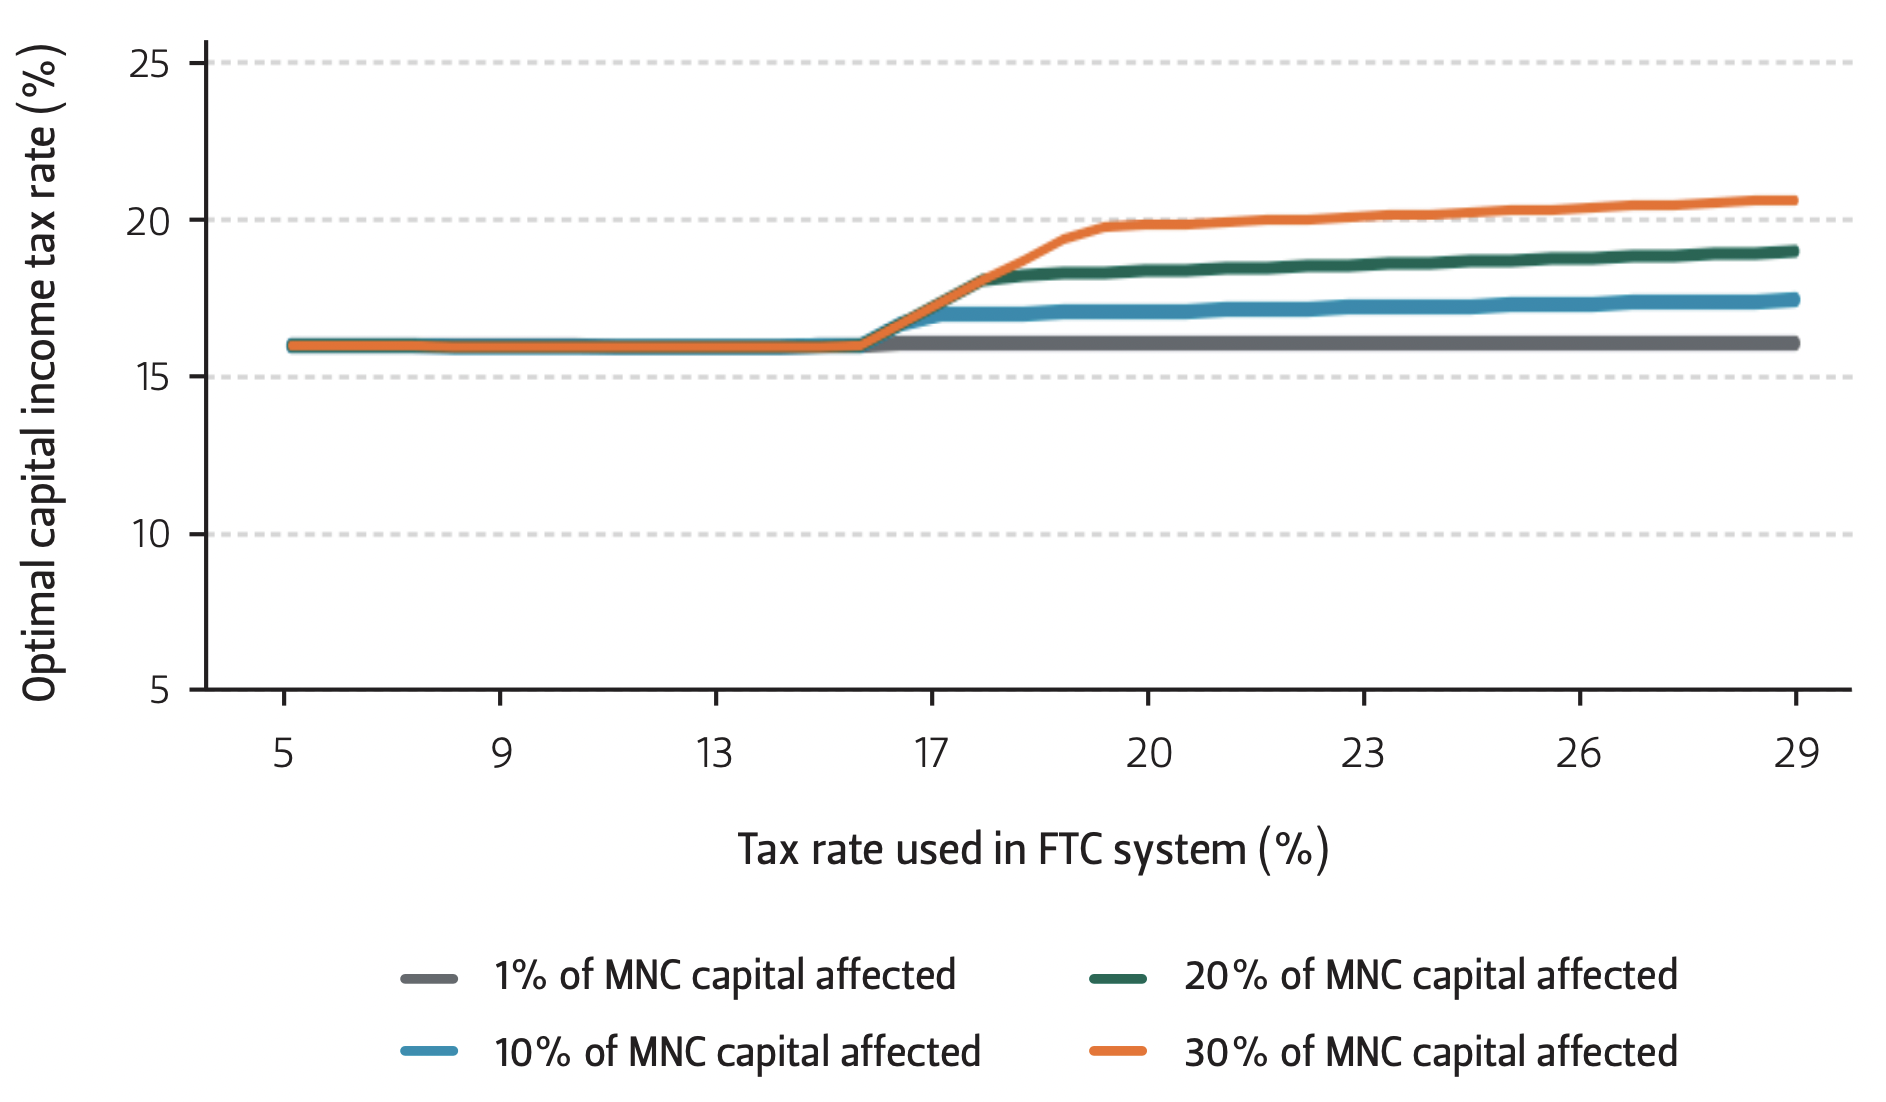 Graph of optimal capital income tax vs tax rate used in FTC system